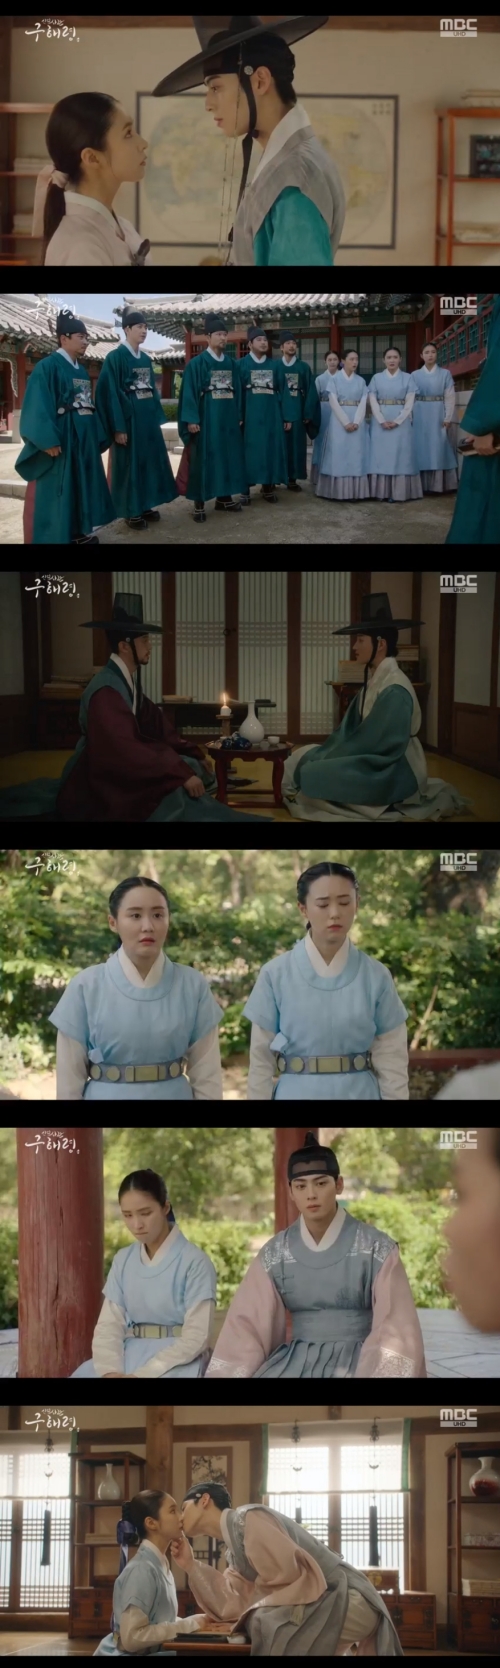 Shortly after the new officer Rookie Historian Goo Hae-ryung Kwonjis knew the love of Shin Se-kyung and Cha Eun-woo, news of the installation of Cha Eun-woos ritual was announced.In the 29th and 30th MBC drama The New Entrepreneur Rookie Historian Goo Hae-ryung broadcasted on the 4th, the Love of Rookie Historian Goo Hae-ryung and Lee Lim (Cha Eun-woo) was announced.On this day, Song Sa-hee (Park Ji-heon) wrote down the book of Rookie Historian Goo Hae-ryung in the library of Yemungwan.It was the part where Daewon Daegun visited Lee Tae (Kim Min-sang) and confessed that he was the one who hid Lee Yang-in.Min Ik-pyeong (Choi Deok-moon) received this. Min Ik-pyeong visited Lee Tae as soon as he read the book, and asked, Do you have anything to hide from me about Dae-gun?It was because I knew that Itae told Irim that the roots that were rotten are inevitable.Meanwhile, Min Woo-won (Lee Ji-hoon) filed an impeachment appeal of the Bible (Ji-gun-woo) to Lee Jin (Park Ki-woong); Lee Jin tried to impeach the Bible, but he did not ask about the reason for the impeachment.He added that it is a felony to inform the contents of the book as much as to disclose the contents of the book, and he dismissed the questions of the officials.The impeachment of the Bible was also reported late to the presbyterian. The presbyterian officers were surprised at the impeachment of the Bible, and questioned the reason, but Min Woo-won said that it was already over.The officers were resentful of Min Woo-wons cool attitude, saying he was a human being without blood or tears, and that he would protest.No matter how angry you are, the fact that sex censorship has sinned does not change. Therefore, the officers of the temples sympathized with the Bible and collected the money to exile.However, instead of adding the money of the Bible, Song Sae-hee asked, Did you think that the sex censor might have done a real big mistake?Song Sahee then informed that the Bible was afraid of Lee Jin as the content of the book.When the officers were surprised that it is a high crime, Song Sae-hee nailed Min Woo-won to kneel in front of Lee Jin and begged him to save the life of the Bible.Meanwhile, the Bible visited Minwoowon and thanked him.When the Bible said, I thought it was a dead life, but I lived like this. Minwoo won the money and said that he would not thank me.The next day, the officers apologized to Min Woo-won, who also apologized for his DDanger when he did not know Min Woo-won.Min Woo-won responded consistently to the DDanger of the officers and the apology; he also told Rookie Historian Goo Hae-ryung only that you should have understood.Rookie Historian Goo Hae-ryung then said: It wasnt meant to understand, that no good will should be used for the rebuke.I still can not understand it, he said. If you have to save people, you will make the same choice as the Bible.After that, he added to impeach himself and ran away and made Minwoowon absurd.Meanwhile Rookie Historian Goo Hae-ryung and Irim were caught by the Kwonjis while holding hands and enjoying dating in the palace.Oh Eun-im (Lee Ye-rim) and Hearan (Jang Yu-bin) resented how they had been able to hide so far, and criticized Lee for possessing the naive Rookie Historian Goo Hae-ryung.At this time, Nines of the melted party appeared and Rookie Historian Goo Hae-ryung wrapped the tail saying that he hit the tail first.Kwonjis took the Rookie Historian Goo Hae-ryung, Nines protected the Irim, slandered each other, and finally got into a fight.This was barely lulled by the dried-up of Heo Sam-bo (Seongji-ru).So the Kwonjis dragged Rookie Historian Goo Hae-ryung and questioned him.Rookie Historian Goo Hae-ryung praised Lee as I like it and meet it and that Lee is friendly, caring and even when I sleep.Kwon Ji-ji was excited by Rookie Historian Goo Hae-ryungs remark and urged him to tell him everything about Love.Rookie Historian Goo Hae-ryung then entered the Green Sea Party and asked why he admitted to the Love fact in front of the Kwonji.Irim confessed, I always hated it because my existence seemed to be a secret. He kissed Rookie Historian Goo Hae-ryung.However, DDDanger came to me for a while, because Lee Tae asked Lim (Kim Yeo-jin) to allow the wedding of Daewon Daegun and Im allowed him to set up the ritual of Irim.Irim also heard this fact. When Irim was surprised, Rookie Historian Goo Hae-ryung was shocked to hear that he had installed the ceremony.But Rookie Historian Goo Hae-ryung greeted Lee with I am reducing and turned around, and he showed a sense of DDDanger by showing his attitude that he was an inevitable problem.